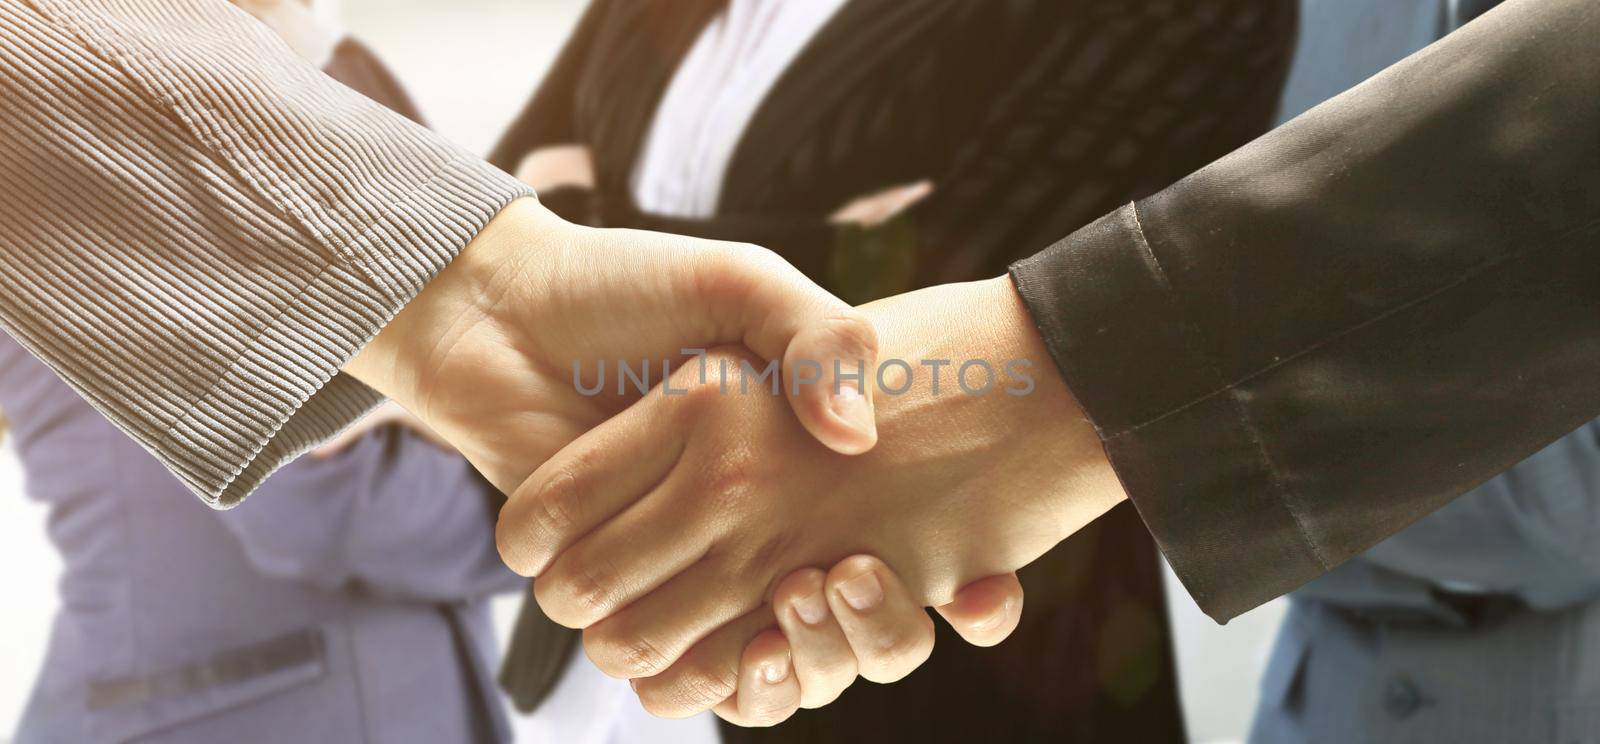 Business people shaking hands by SmartPhotoLab